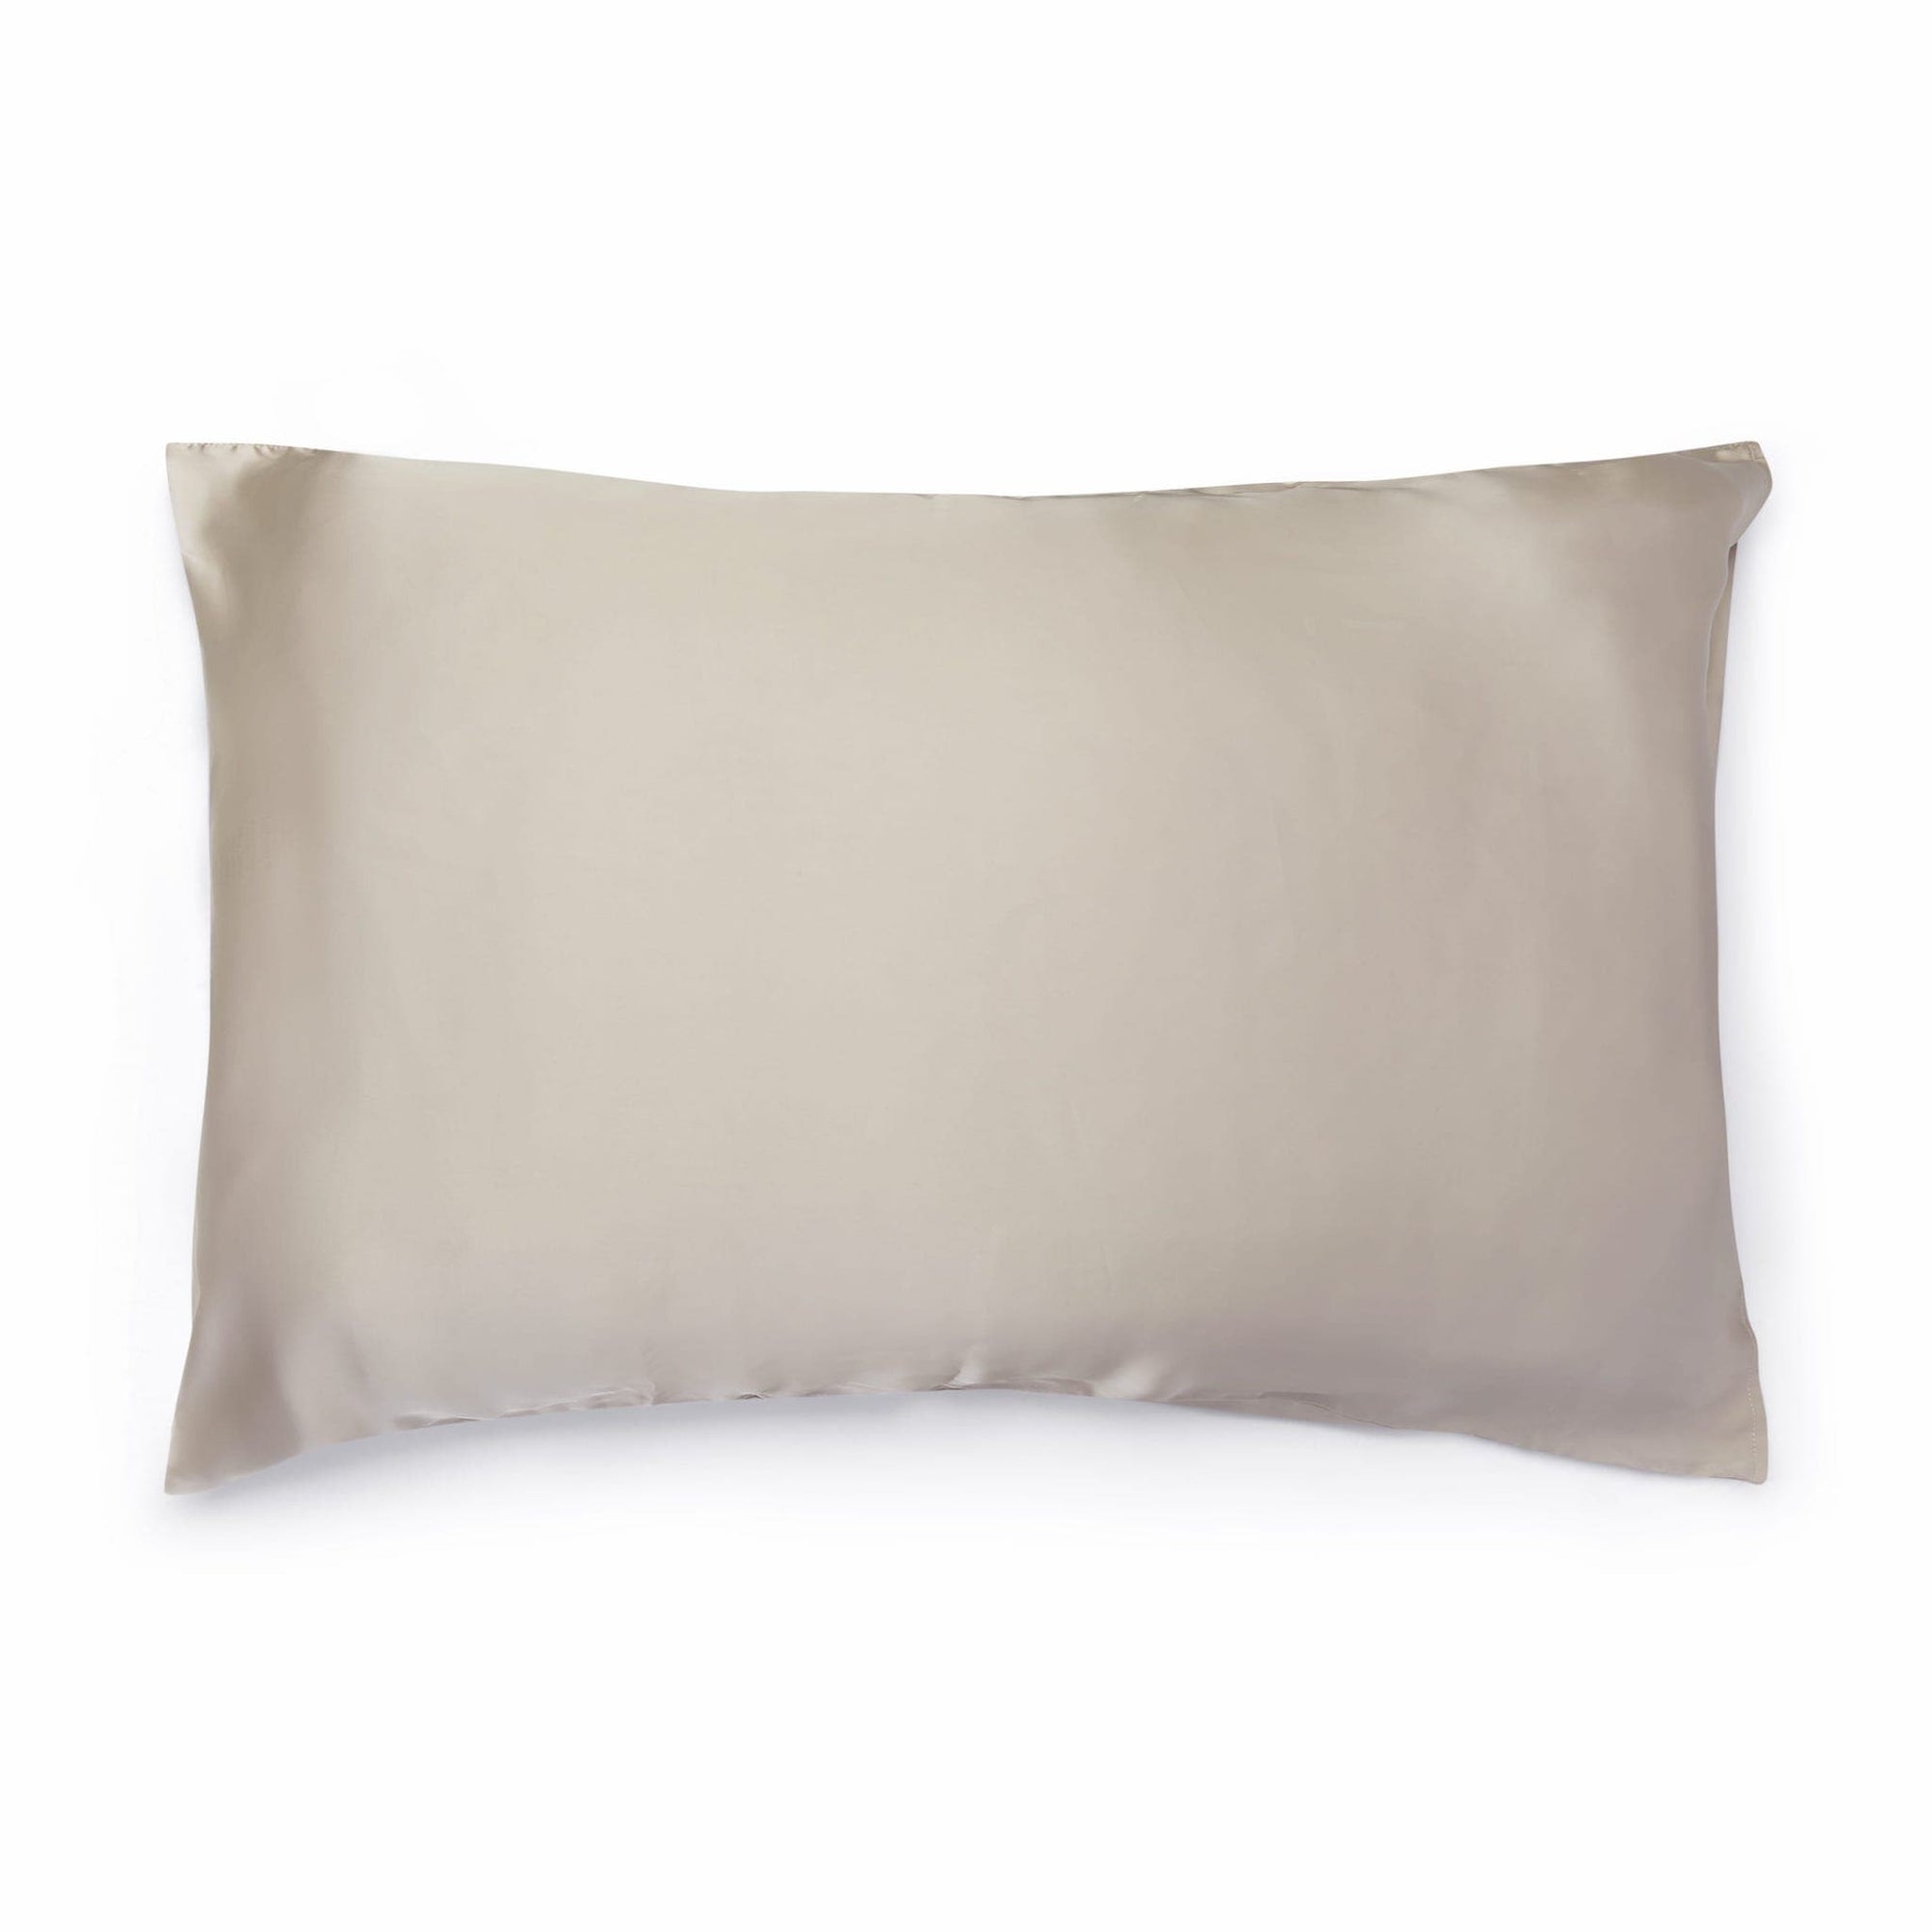 Only Curls Satin Pillowcase - Champagne - Only Curls